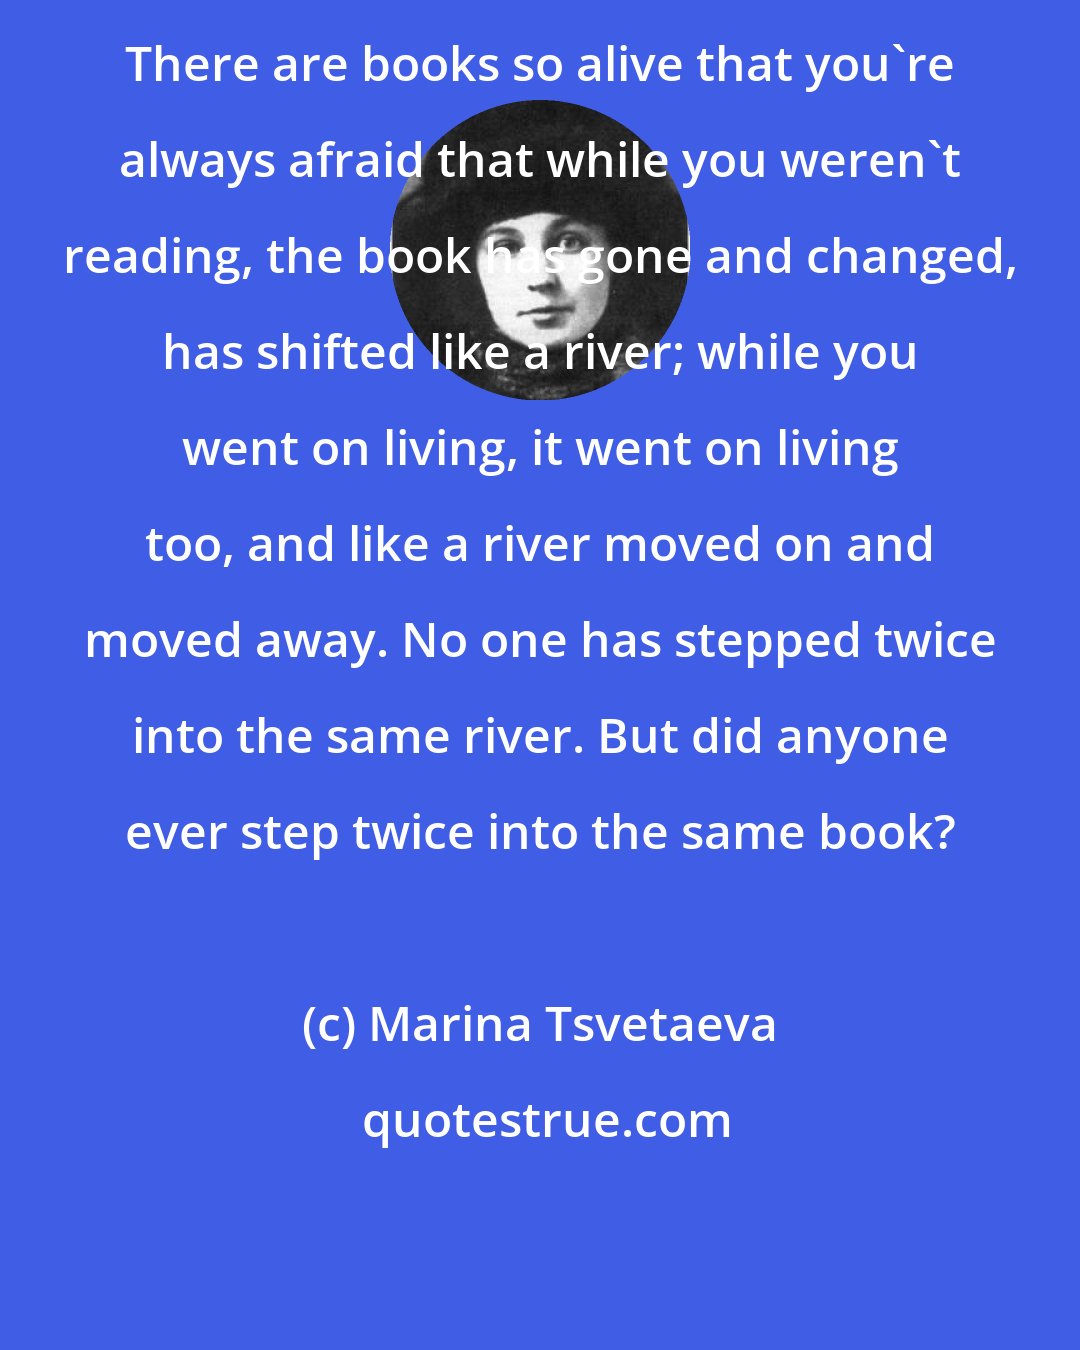 Marina Tsvetaeva: There are books so alive that you're always afraid that while you weren't reading, the book has gone and changed, has shifted like a river; while you went on living, it went on living too, and like a river moved on and moved away. No one has stepped twice into the same river. But did anyone ever step twice into the same book?